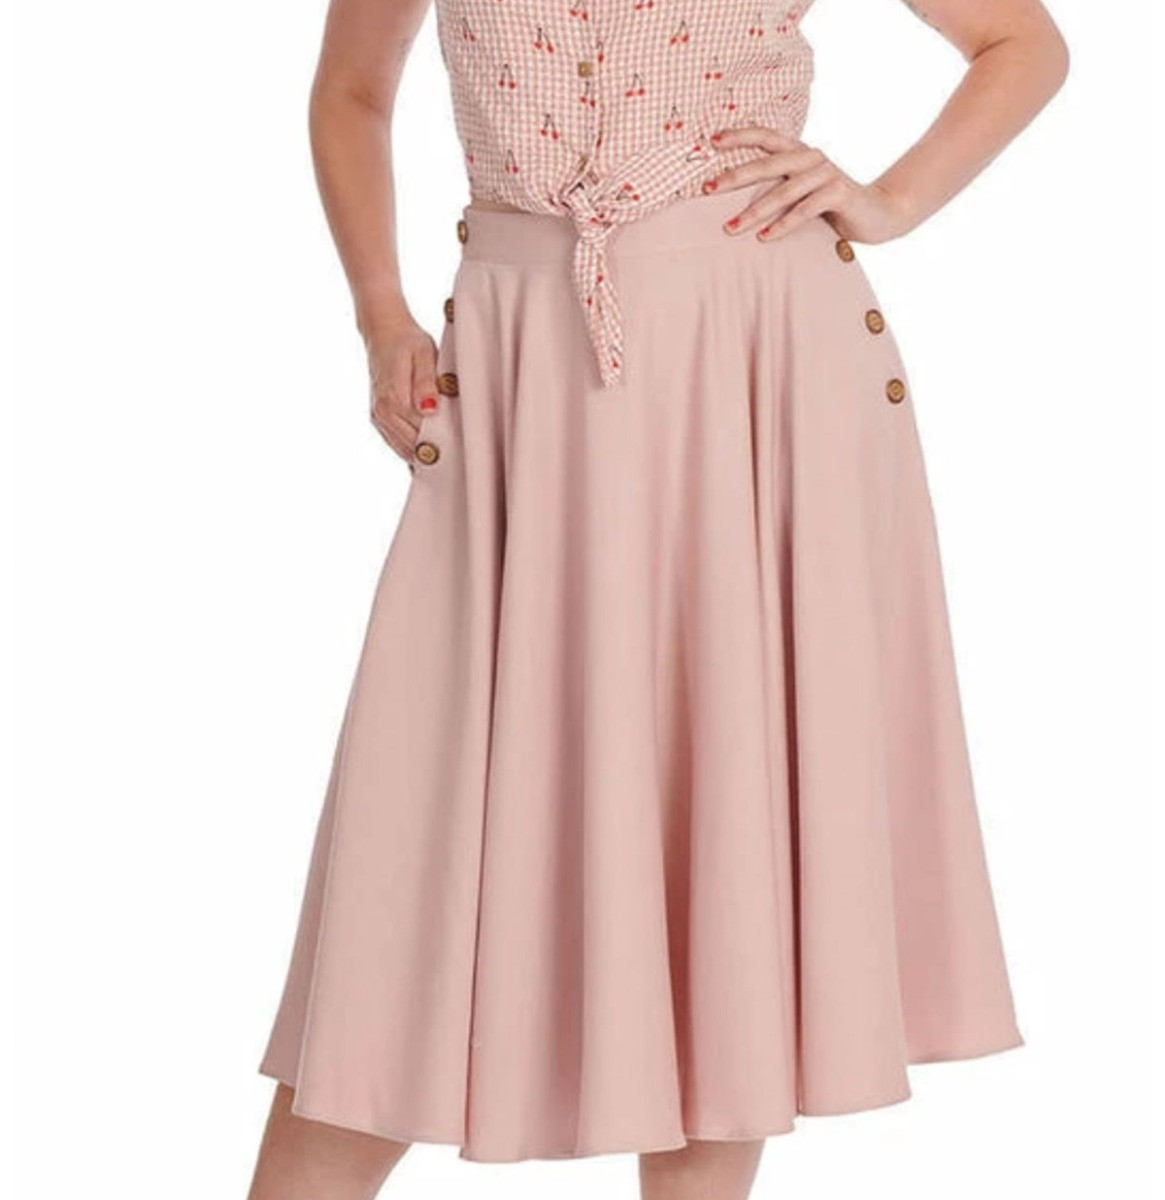 Banned Polly May Swing Skirt Pink -L